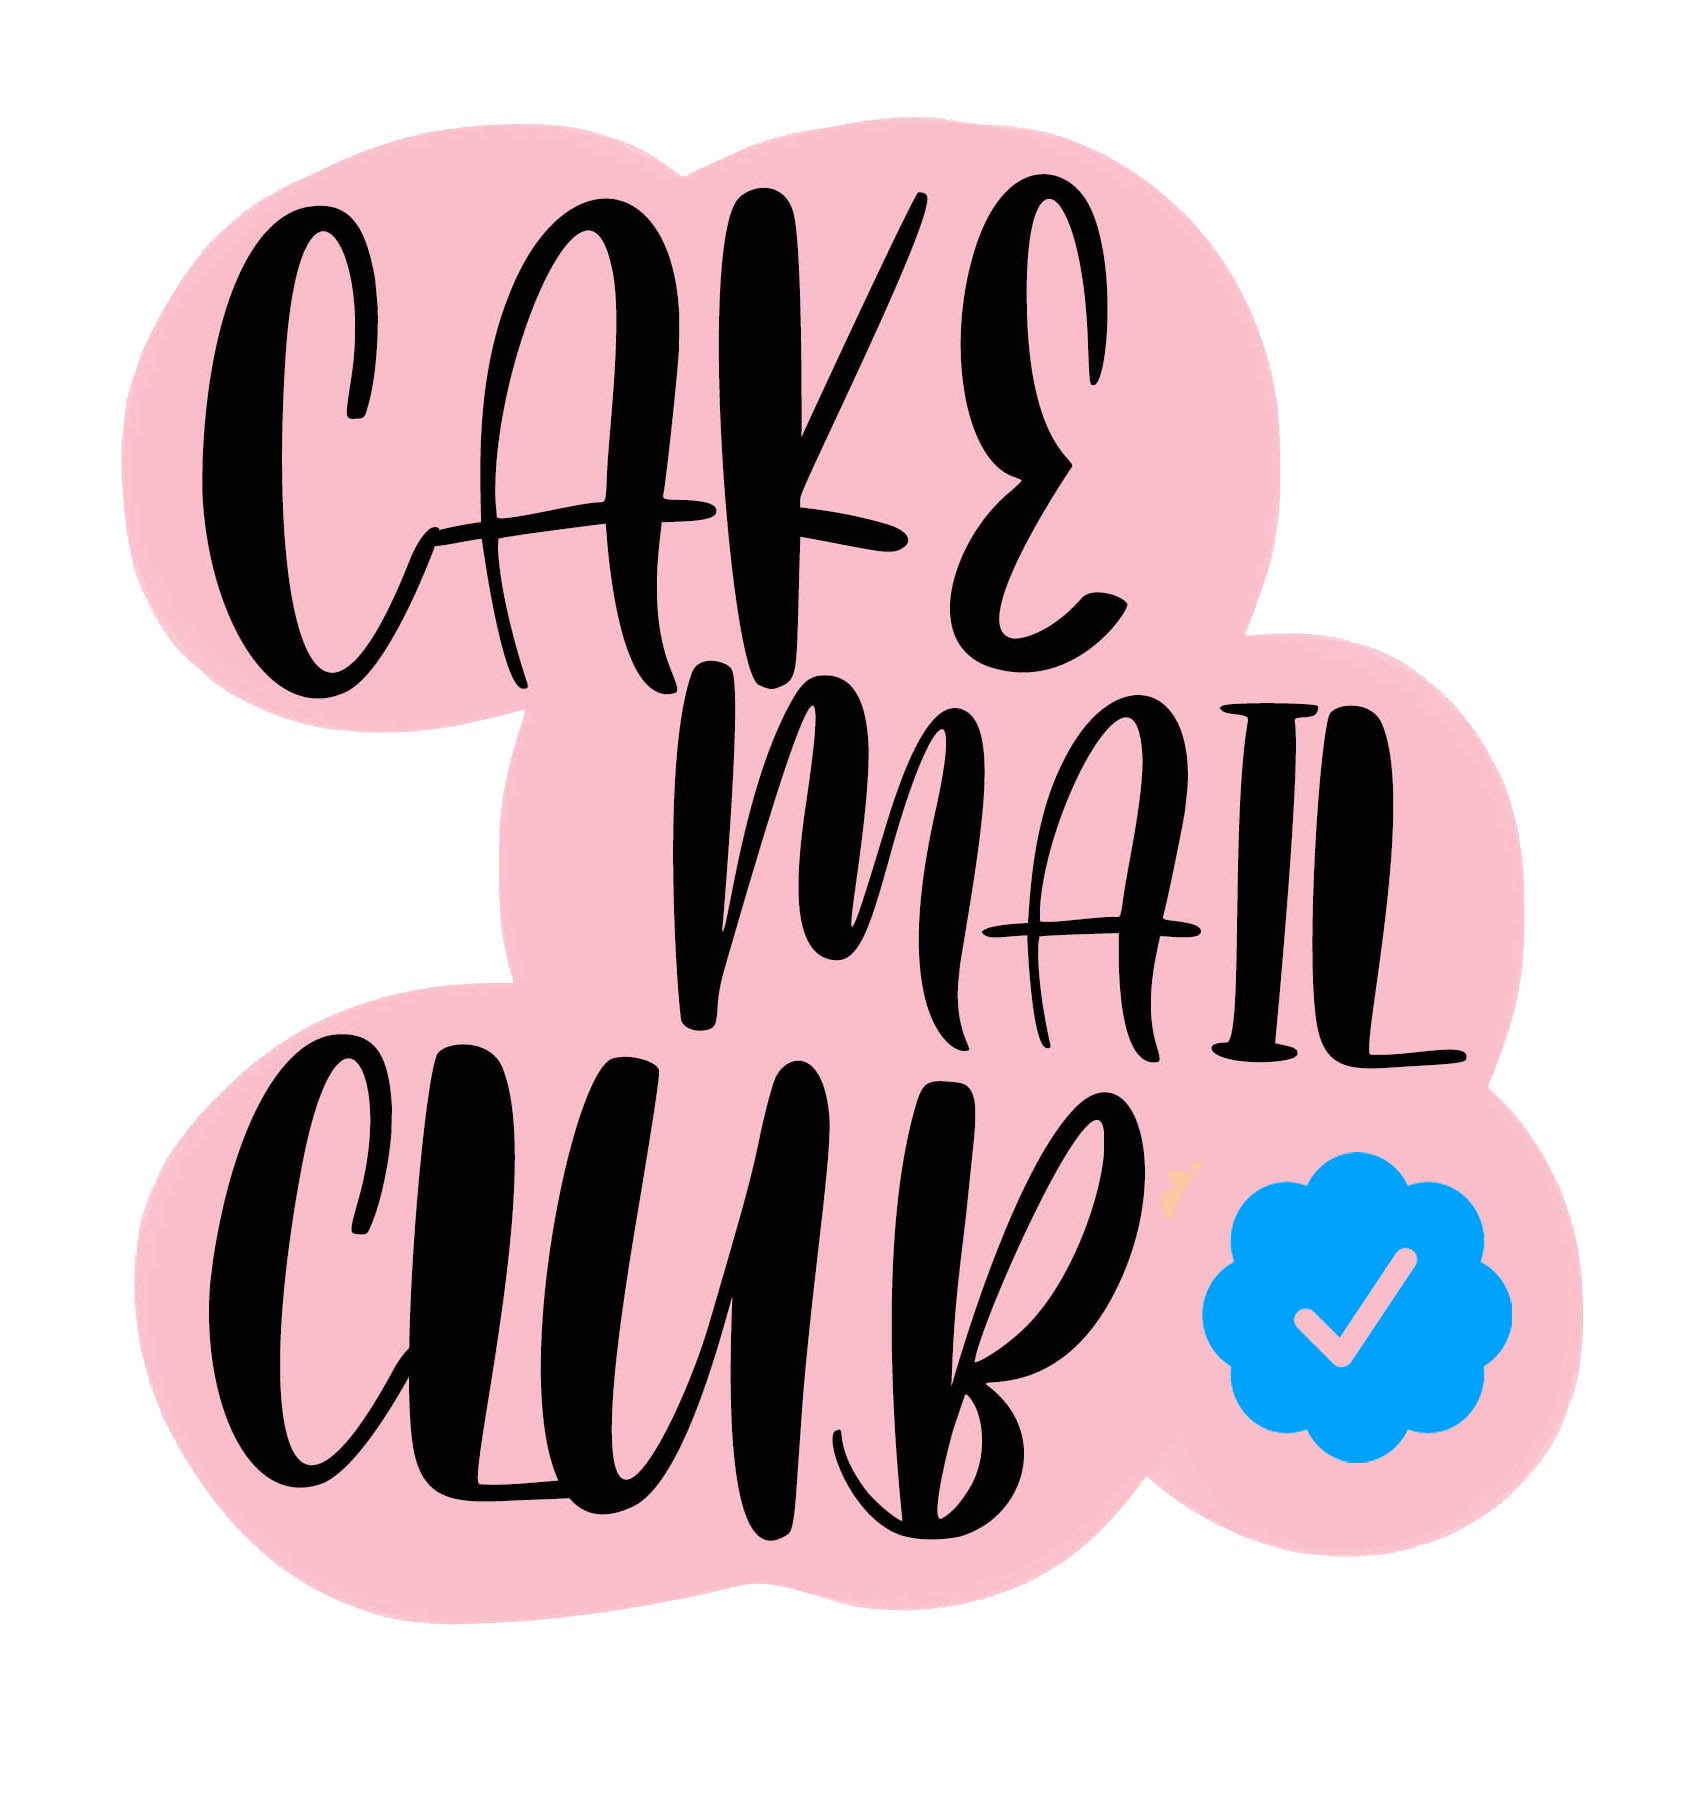 Club Cake. (@clubcakesa) • Instagram photos and videos